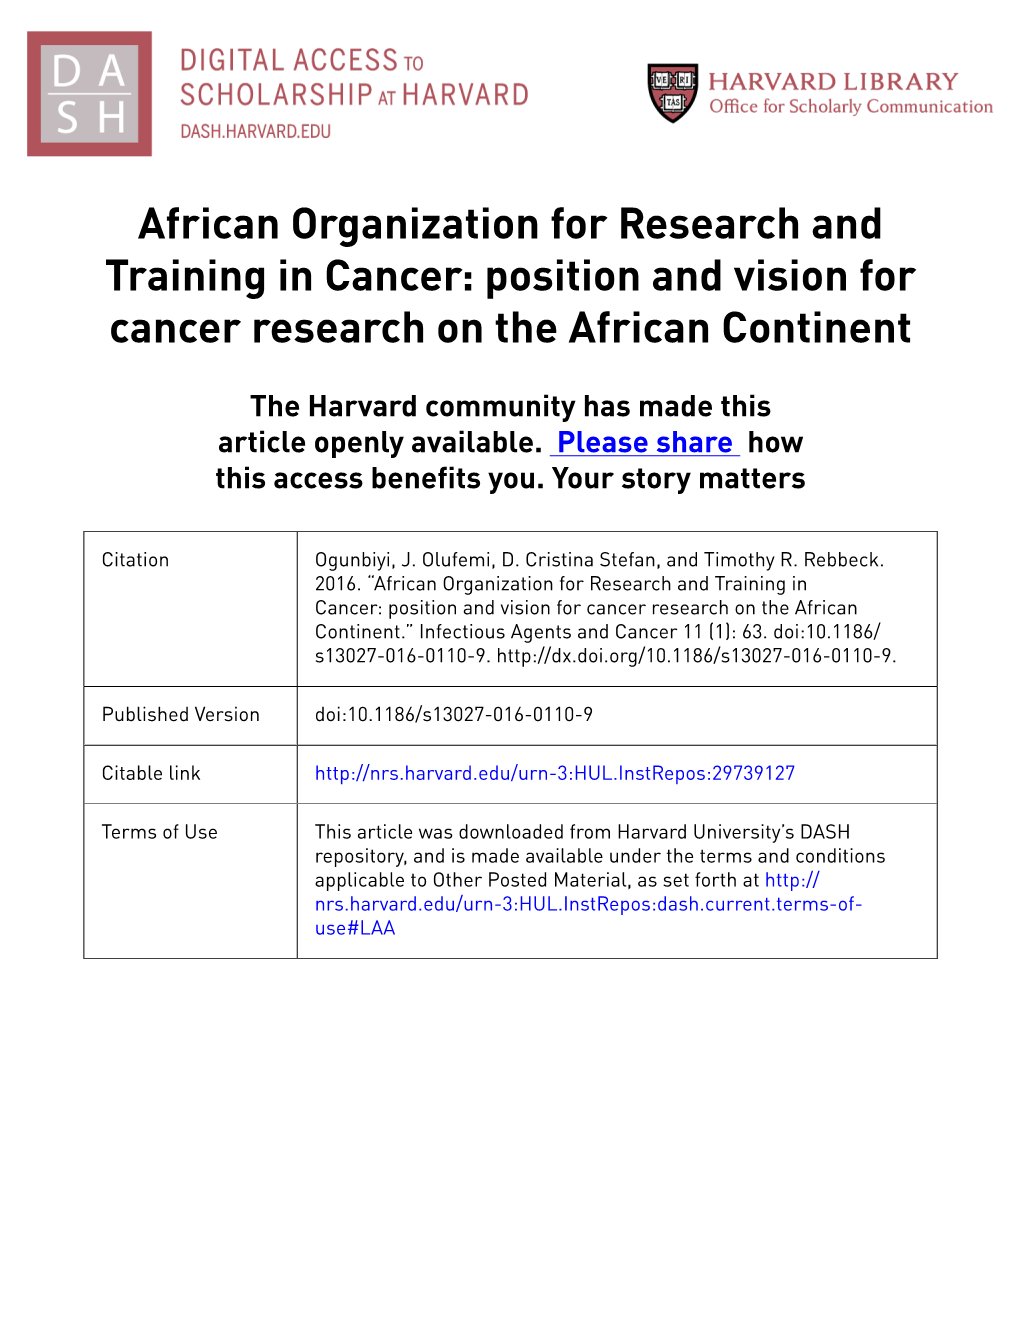 Position and Vision for Cancer Research on the African Continent